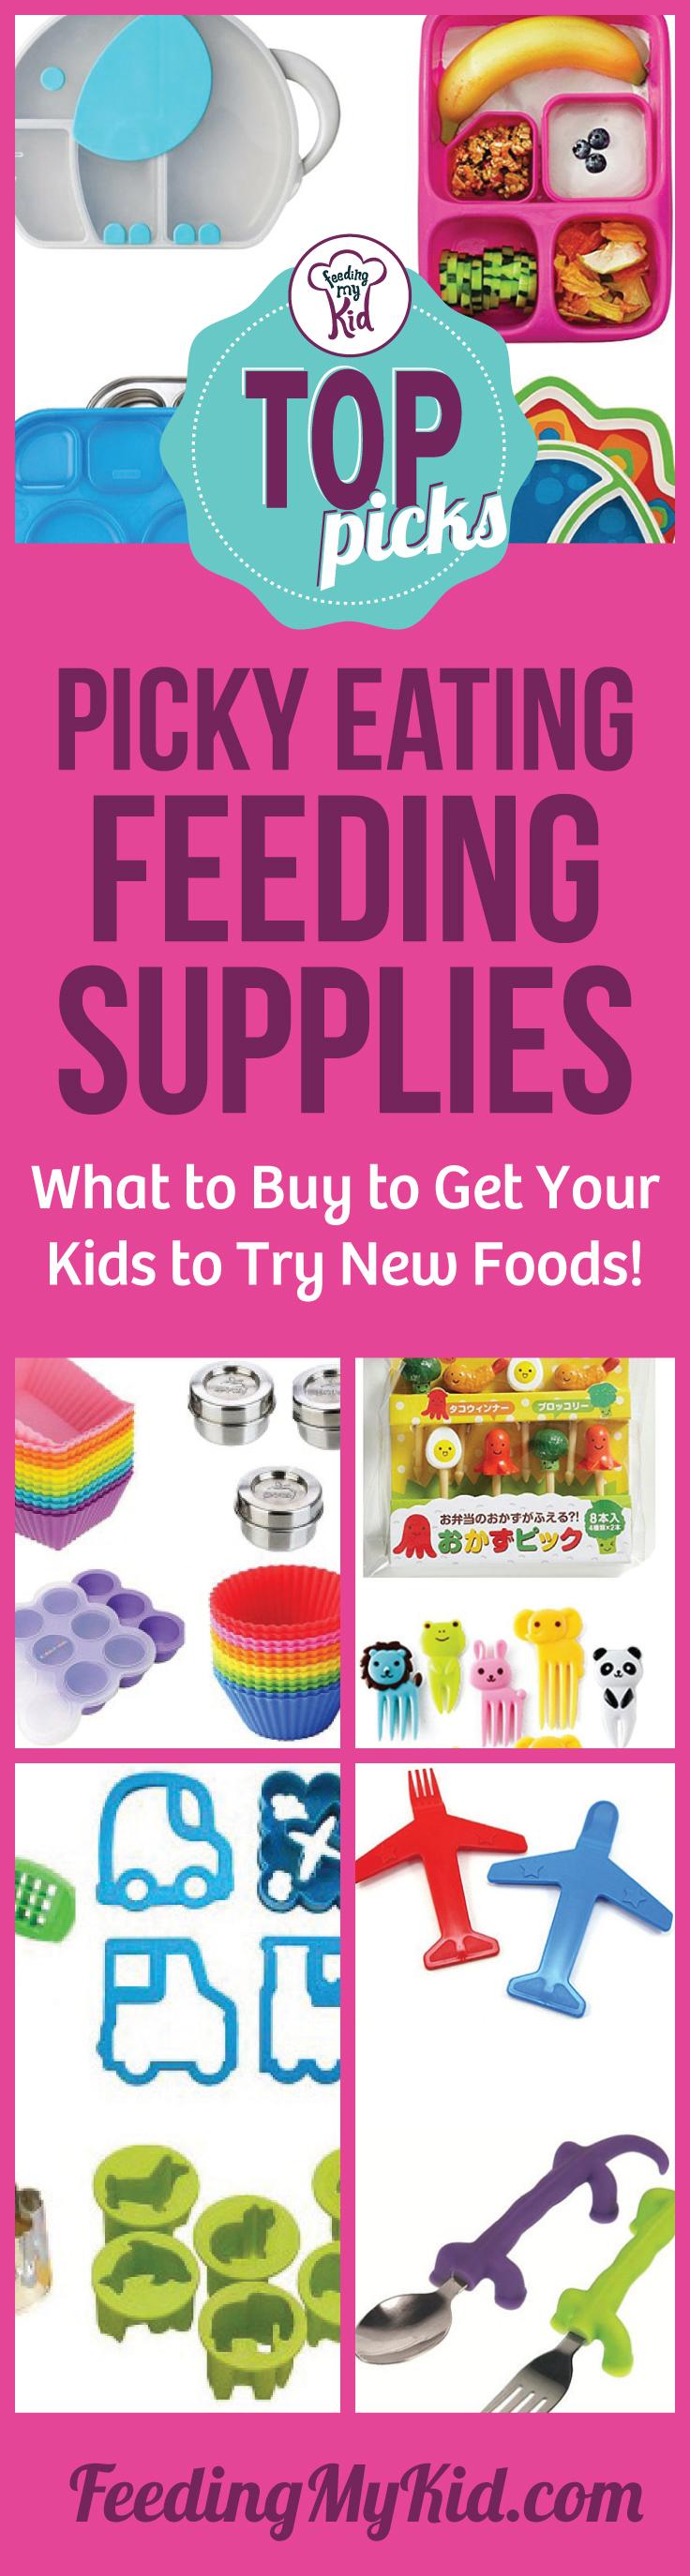 Picky Eating Feeding Supplies and Picky Eating Tools